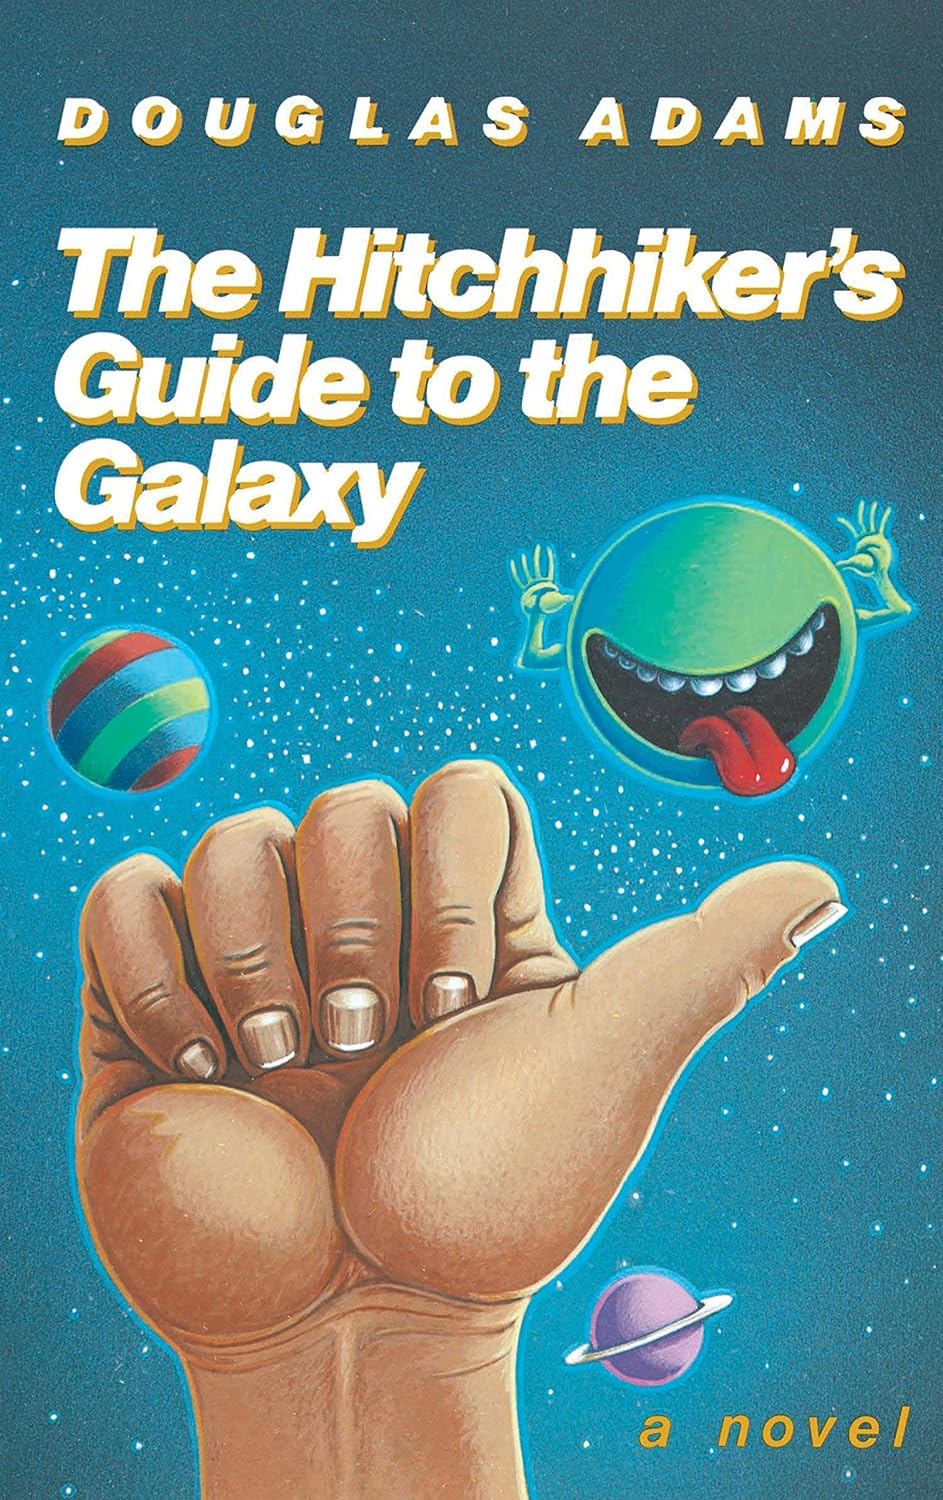 “The Hitchhiker's Guide to the Galaxy” by Douglas Adams (1978)